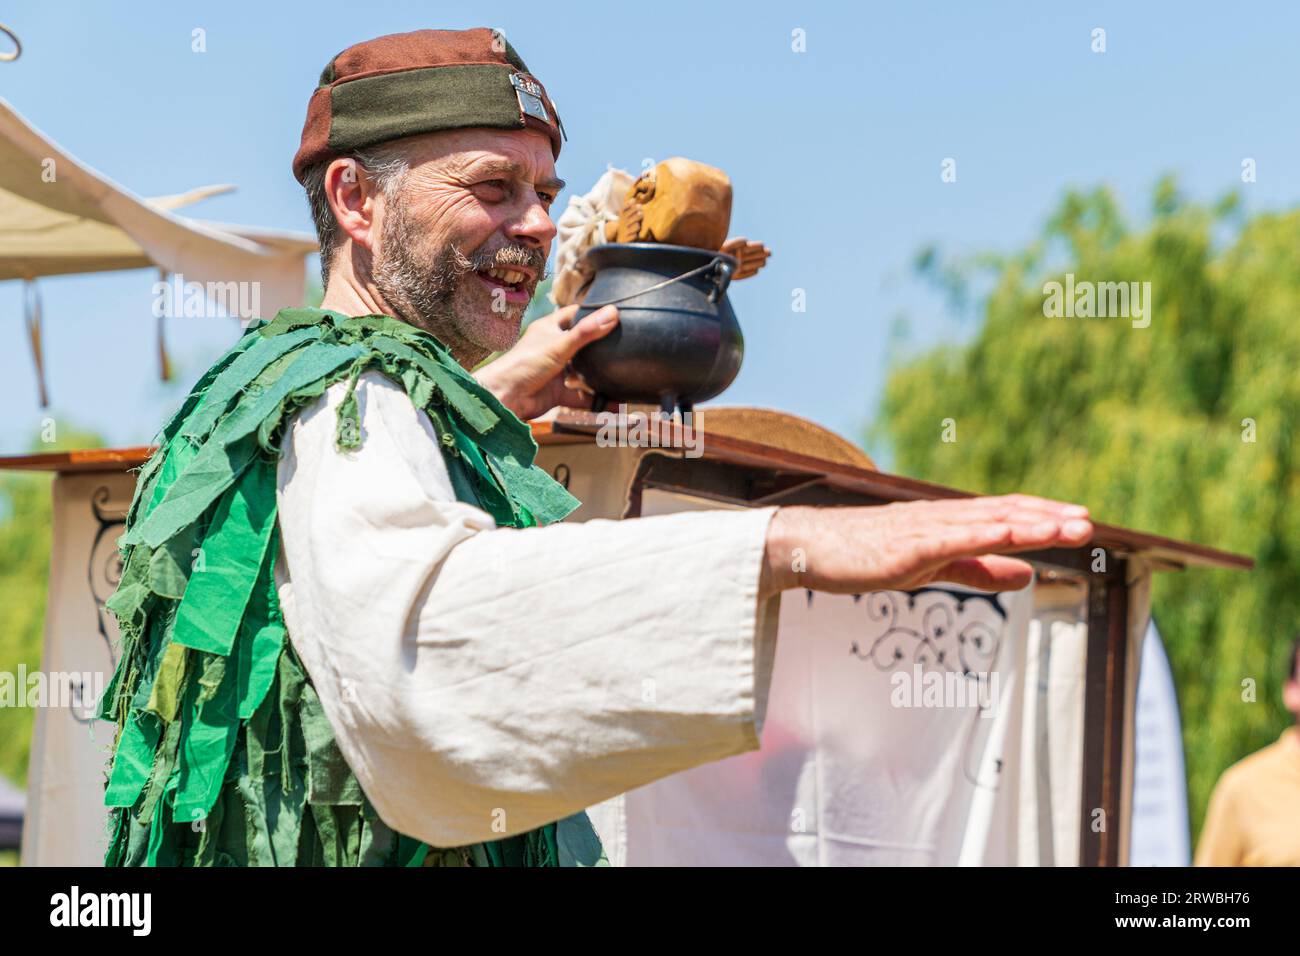 Medieval puppeteer in a green period costume, performing with puppet during a reenactment event at Sandwich town in kent in the summertime. Stock Photo